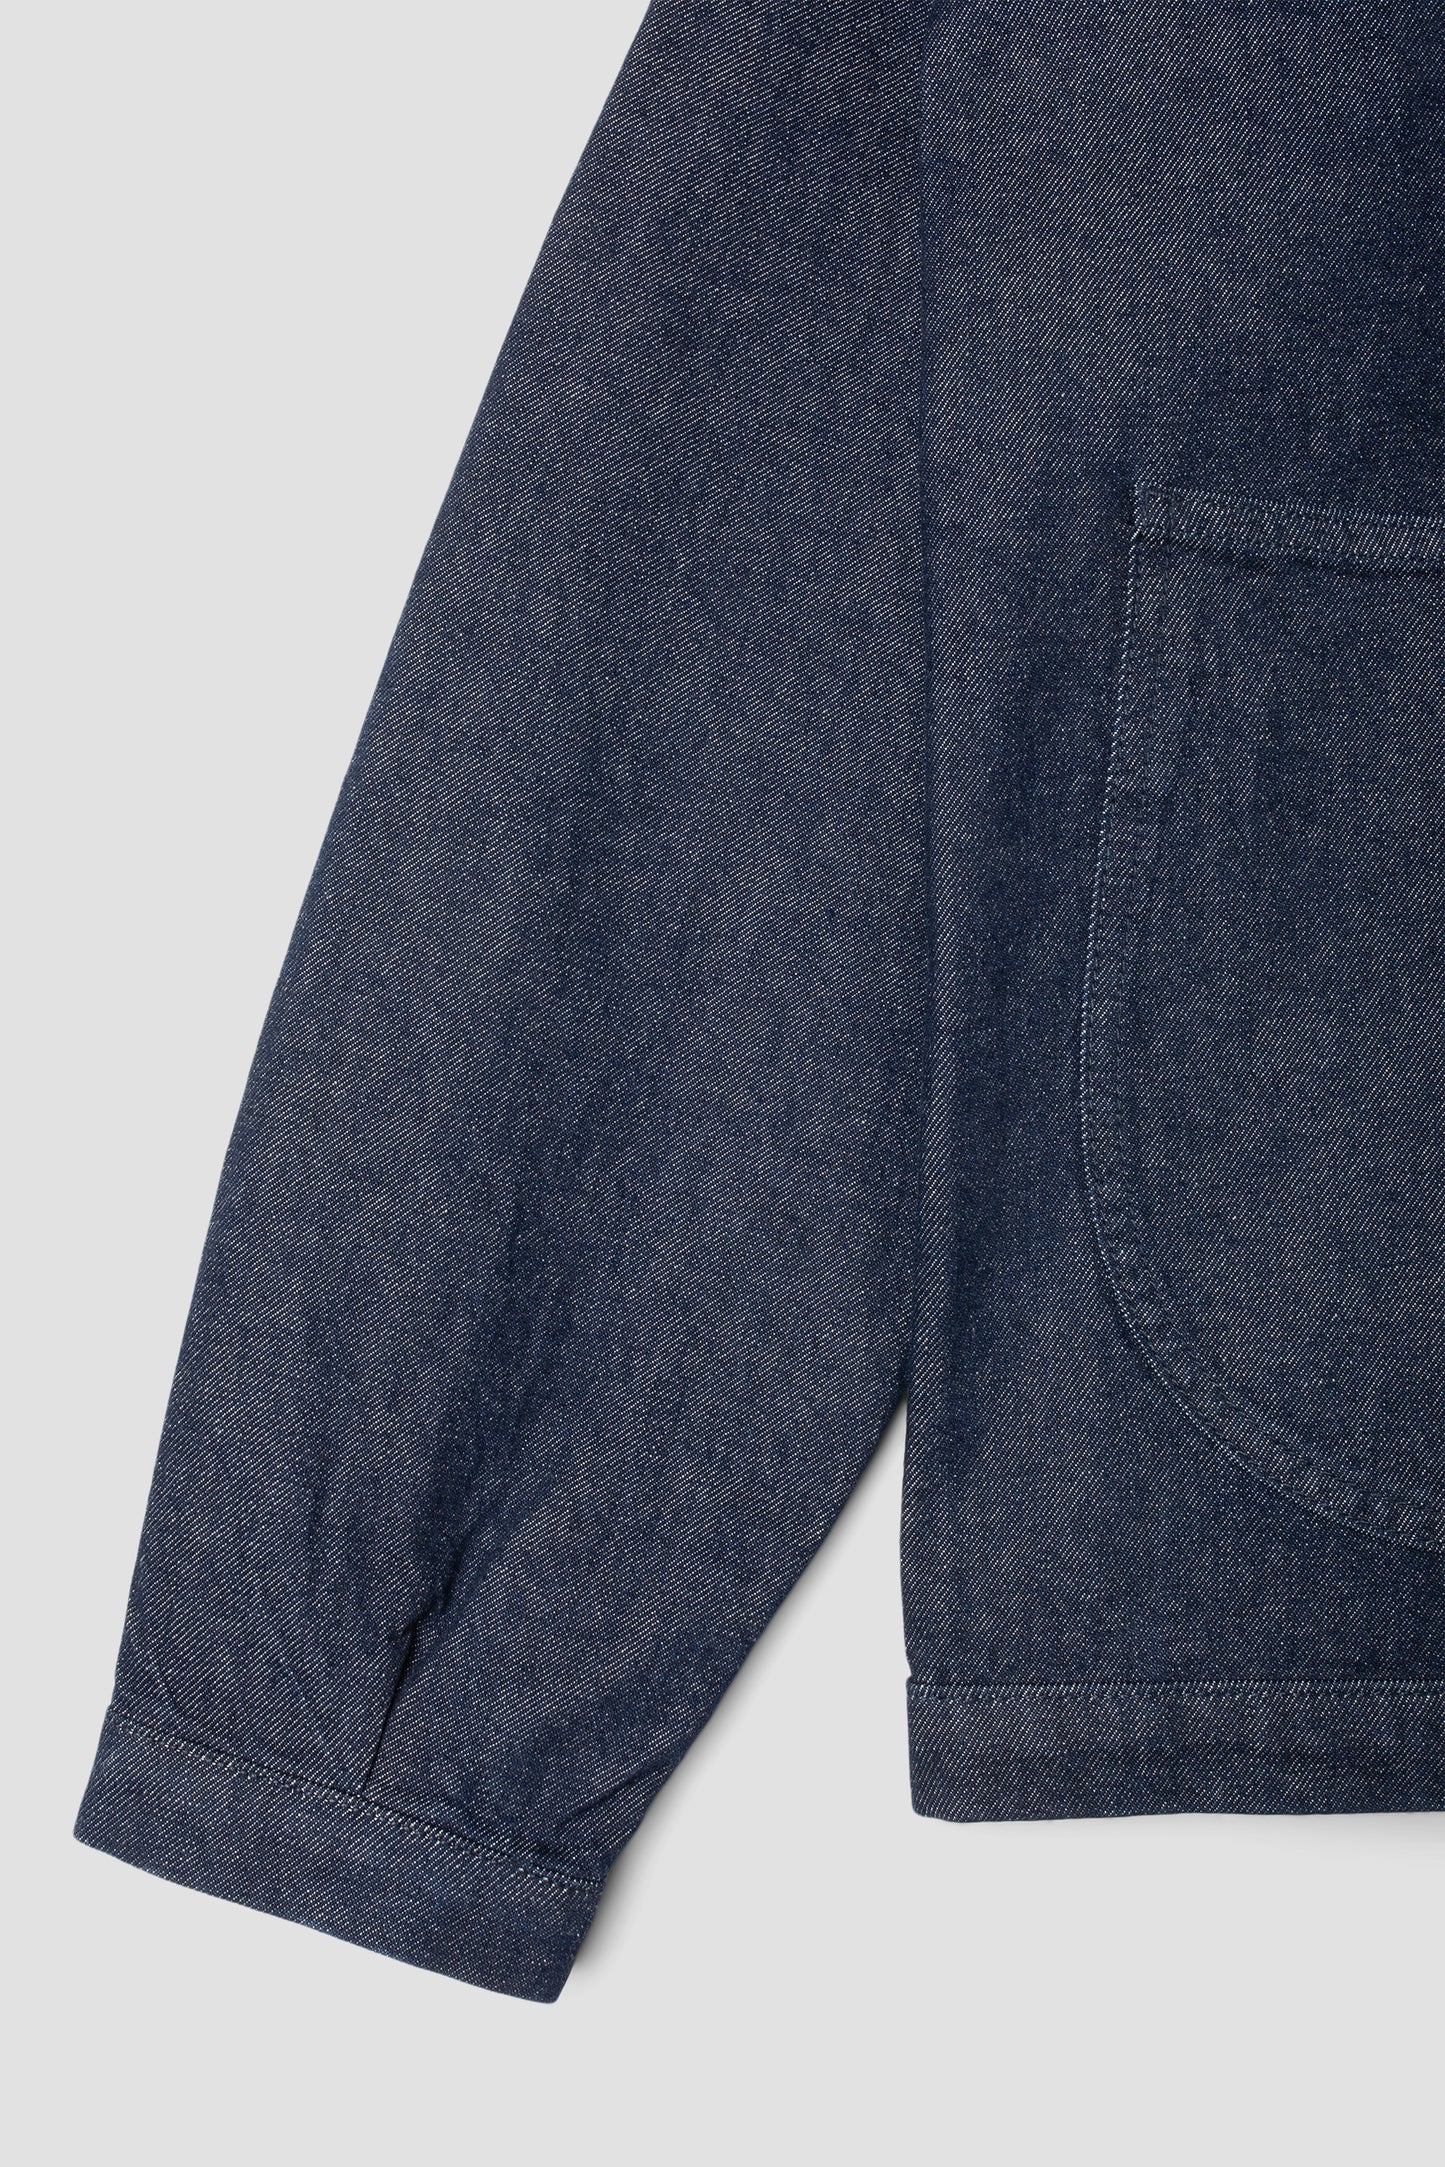 Stan Ray - Coverall Jacket (unlined) - raw denim